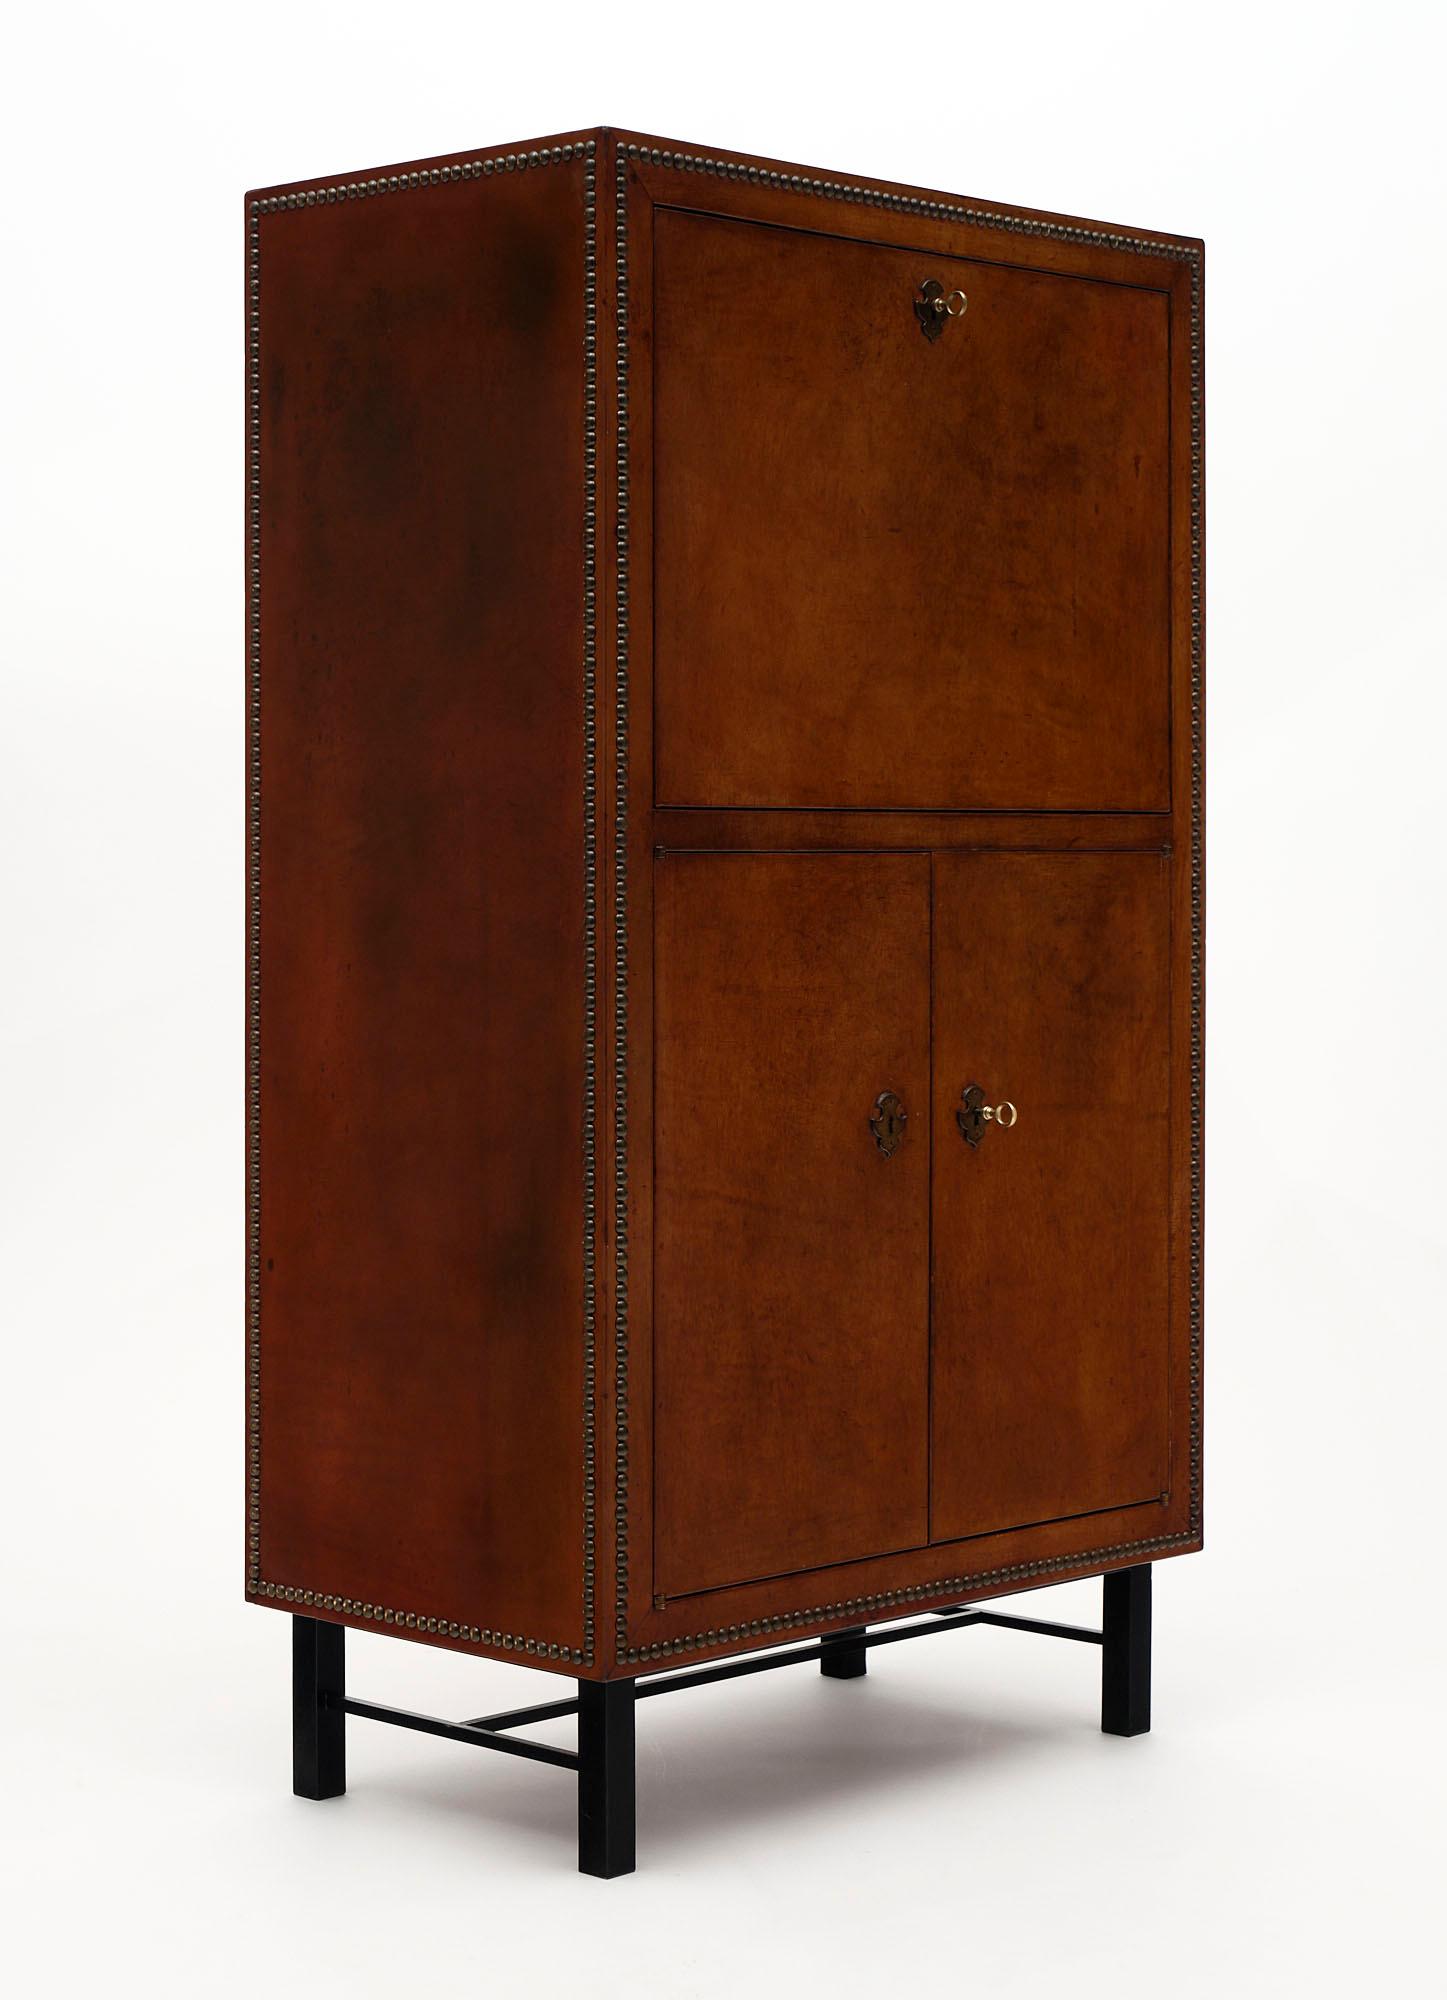 Secrétaire, French, Mid-Century Modern made of cherry wood covered with lambskin leather and decorated with brass nails throughout. The drop front offers a large writing surface with plenty of space inside. Additional storage is featured below the